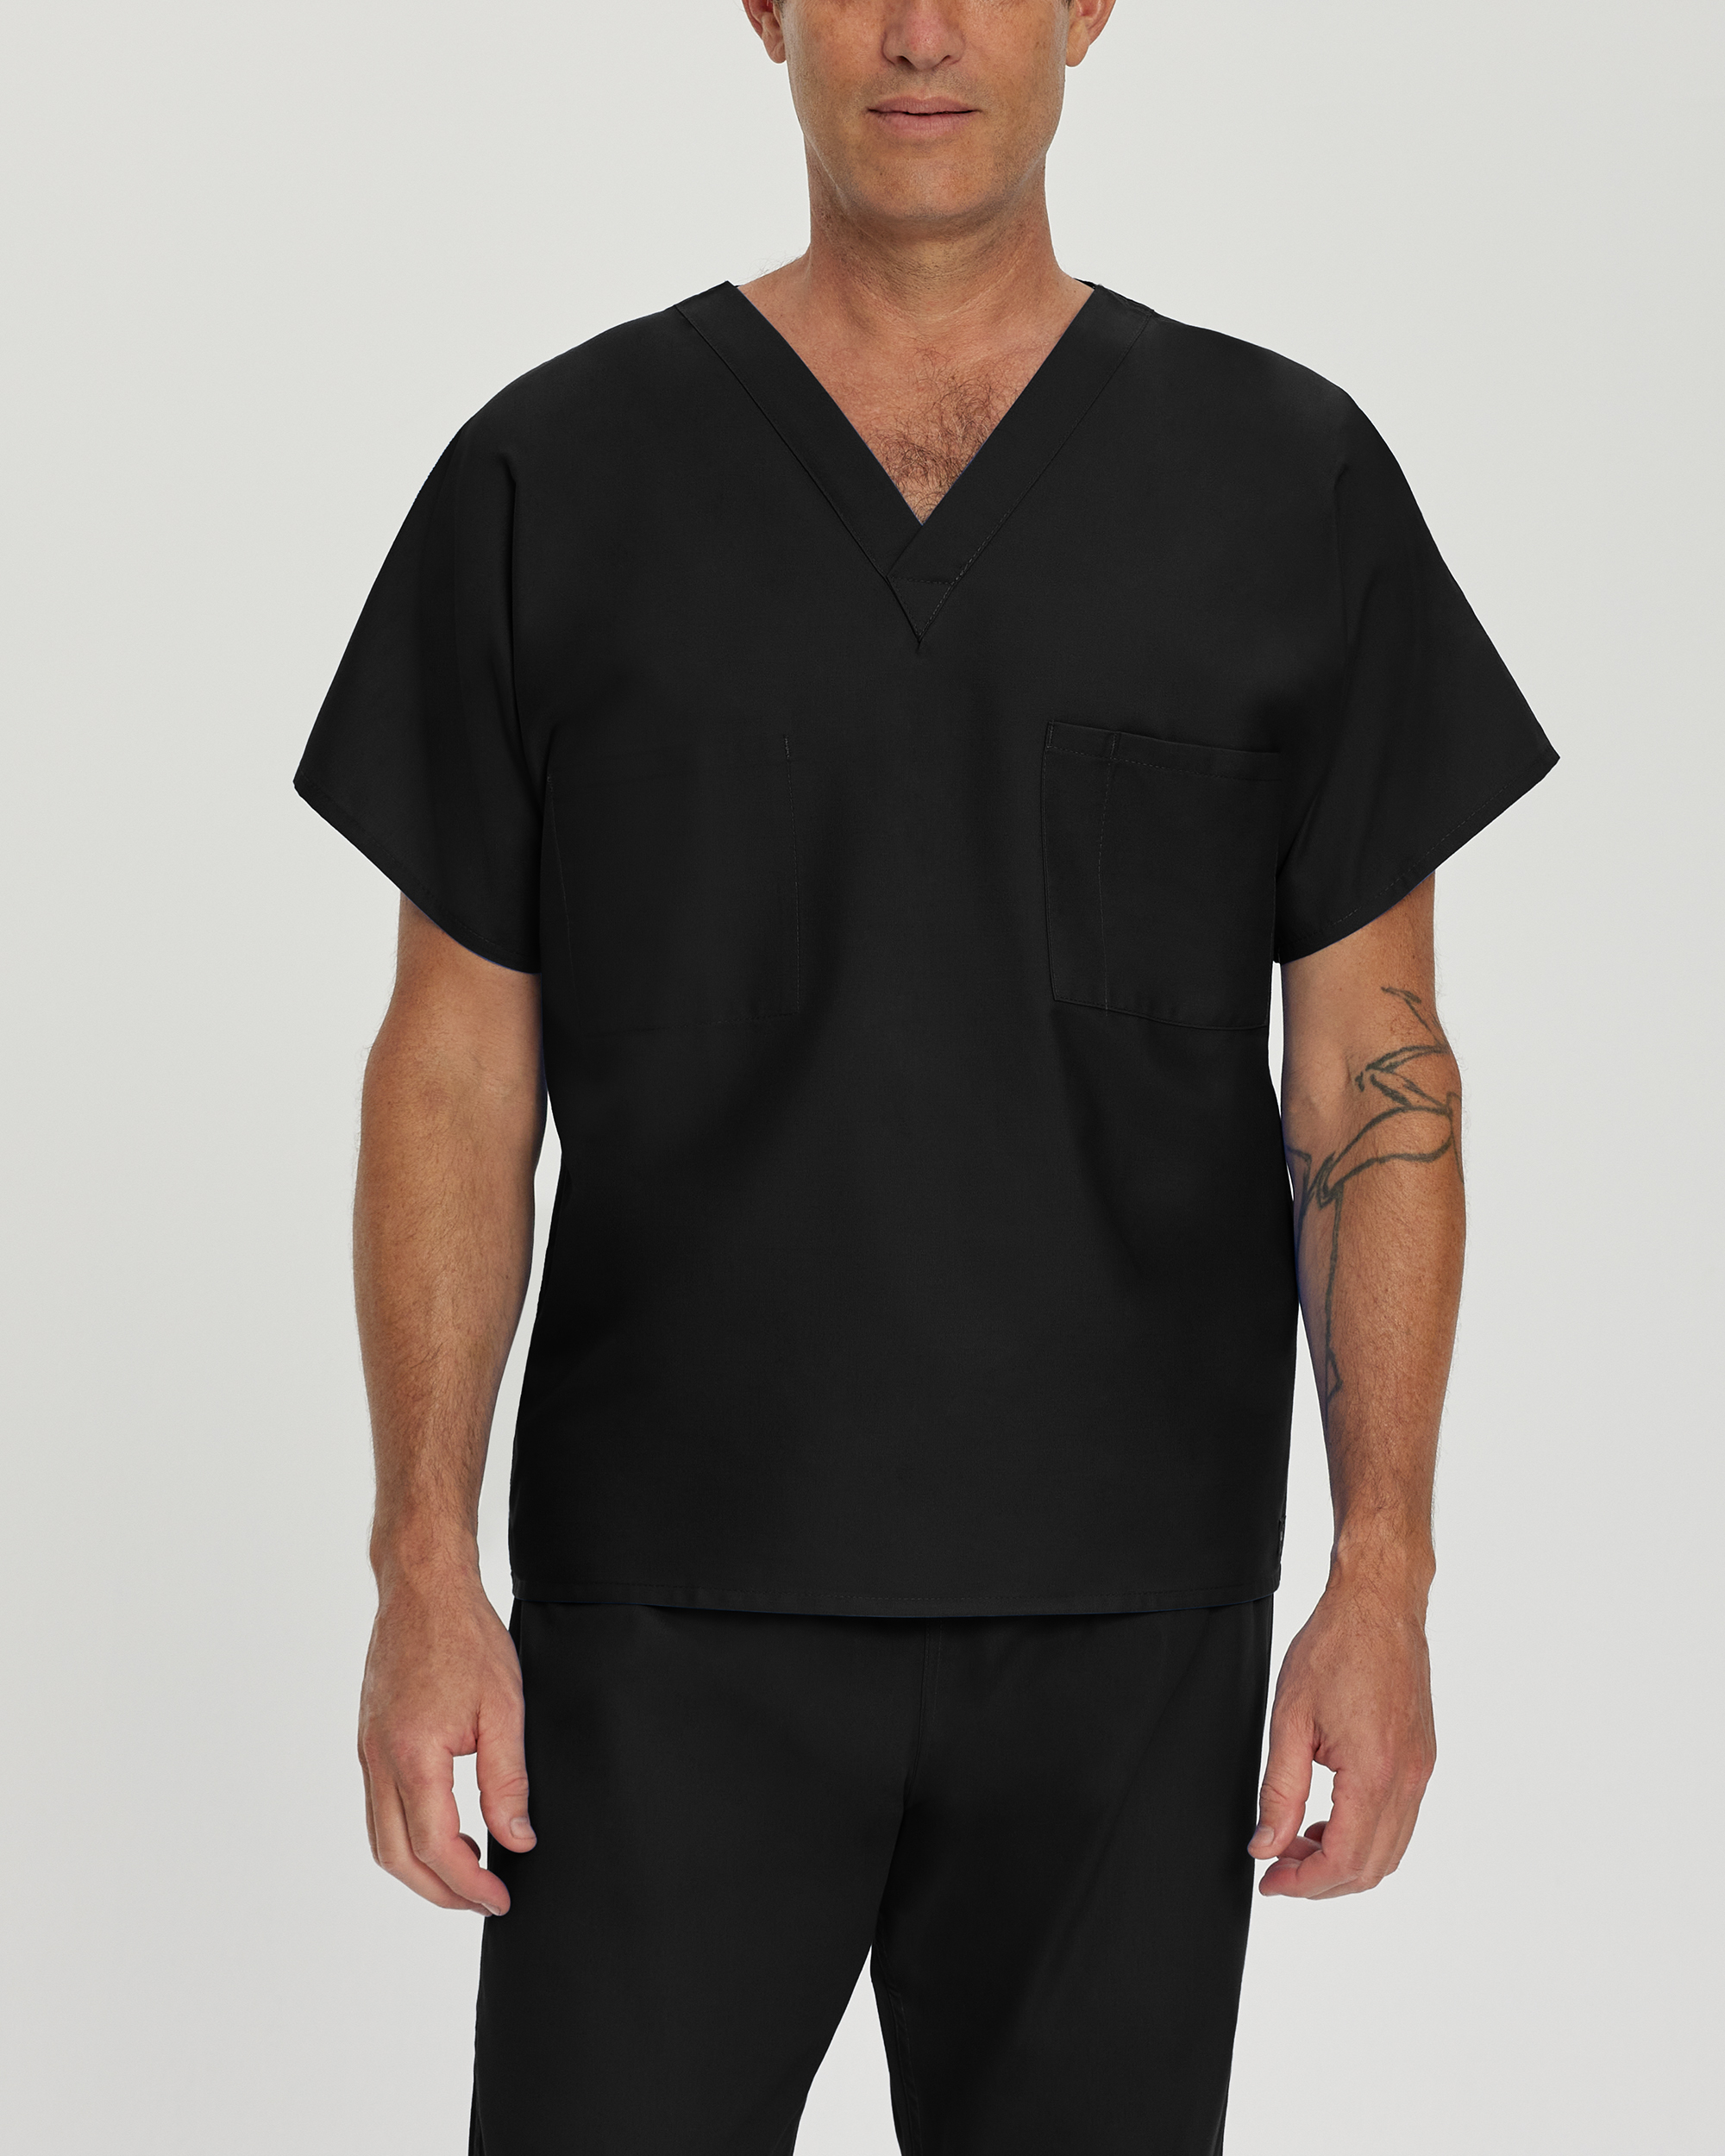 Landau Essentials V-Neck Scrub Top: 1 Pocket, Reversible, Unisex, Classic Relaxed Fit Medical Scrubs 7502 Questions & Answers